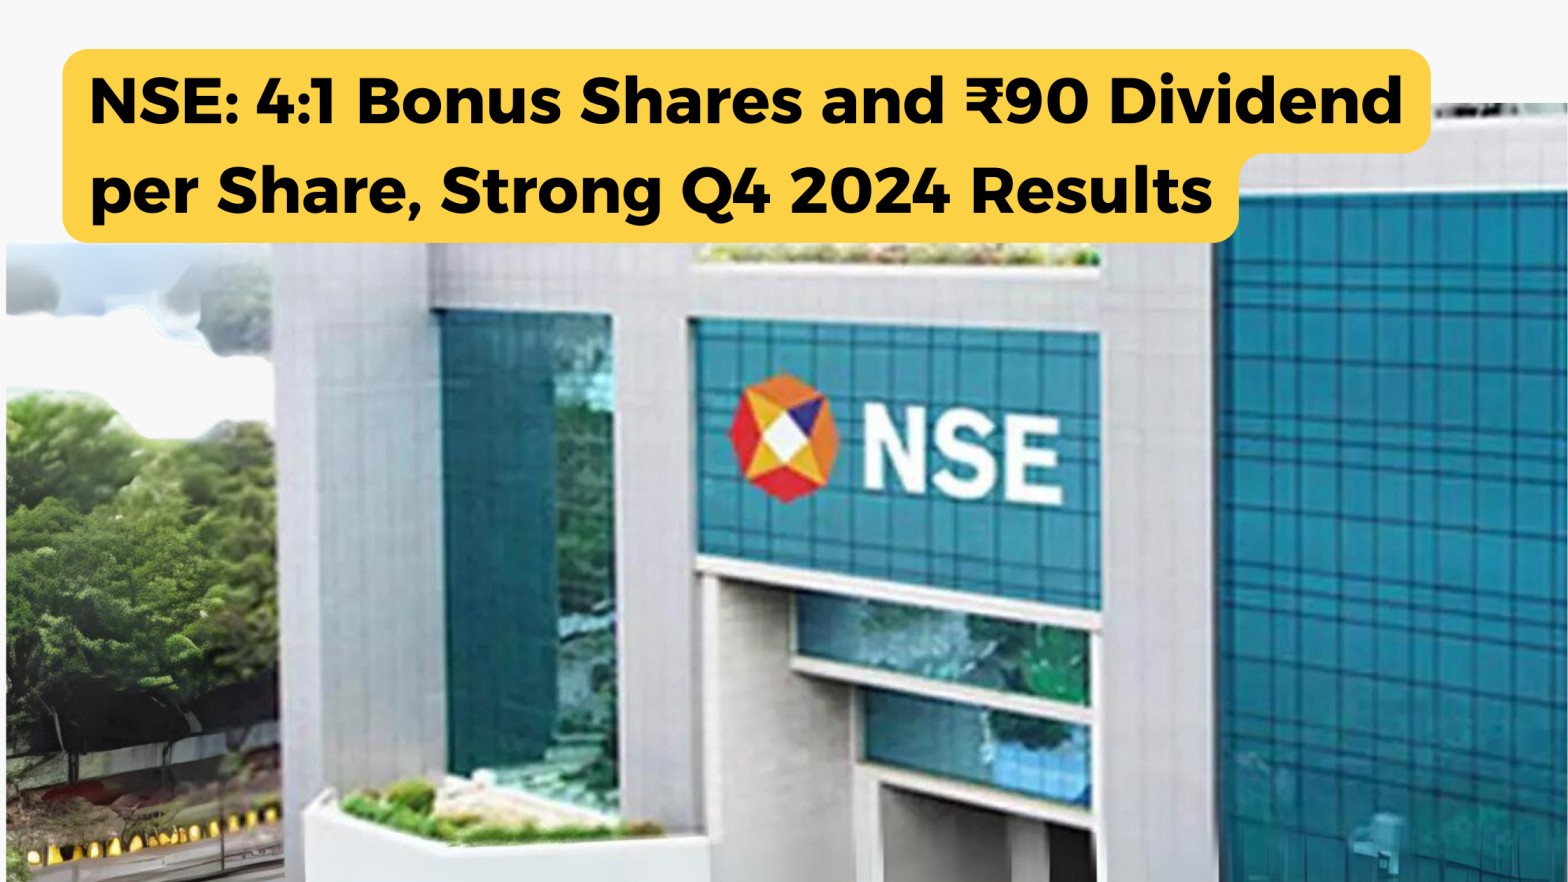 NSE Board Proposes 4:1 Bonus Shares and ₹90 Dividend per Share, Strong Q4 2024 Results